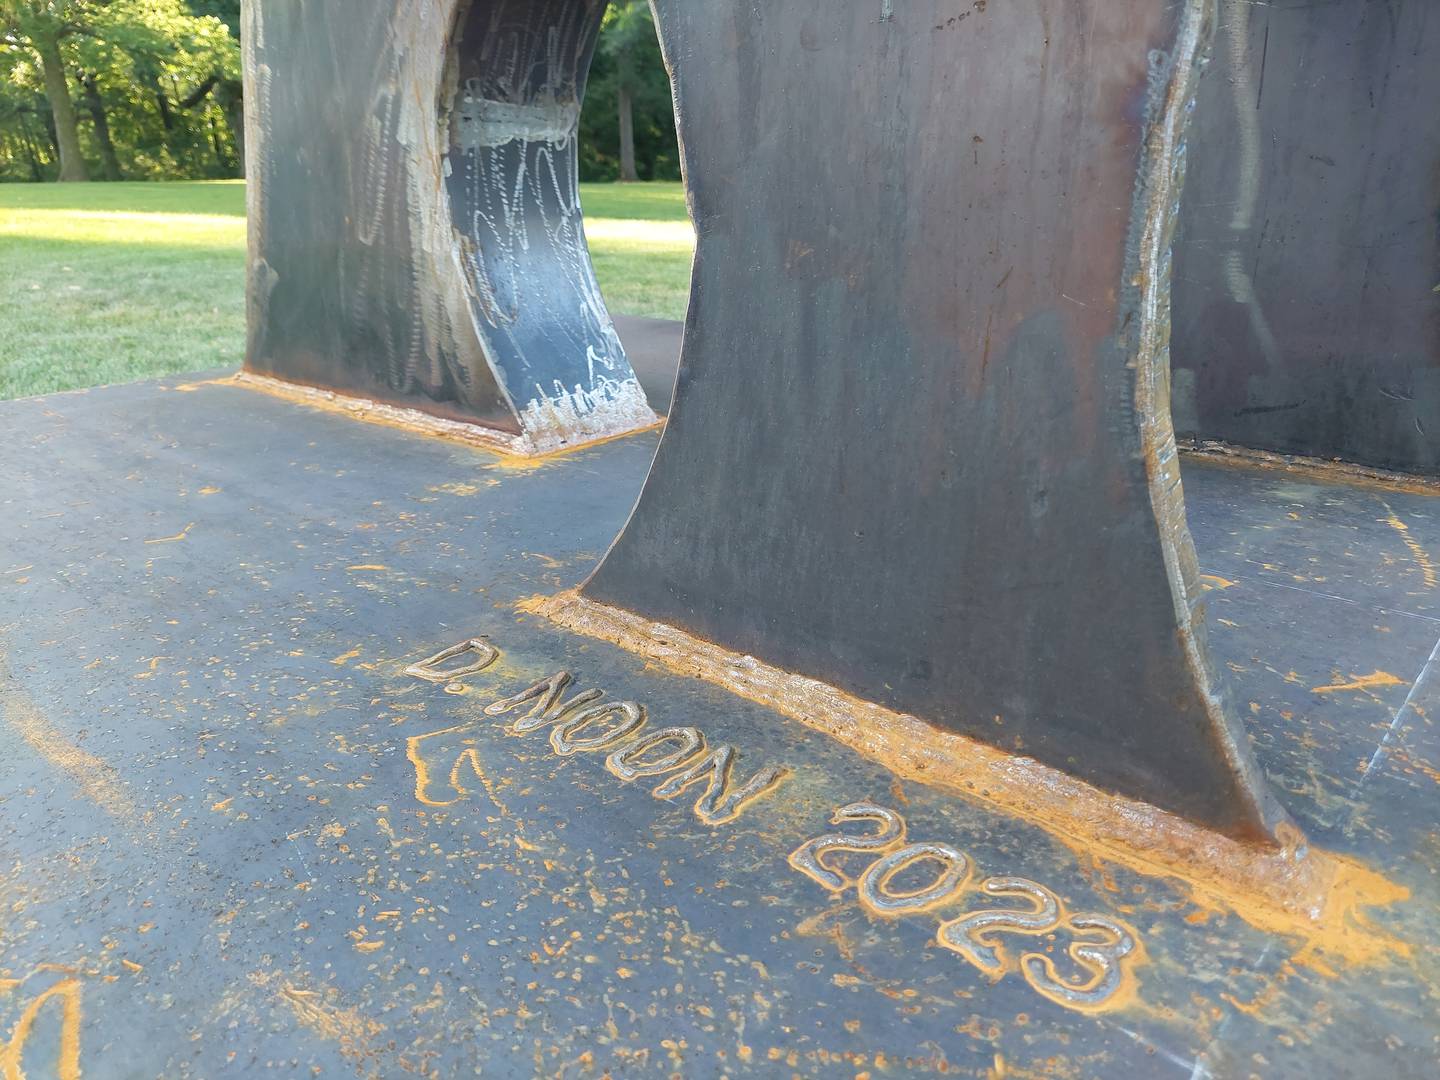 Don Noon's signature is on his latest sculpture placed at Marilla Park in Streator.